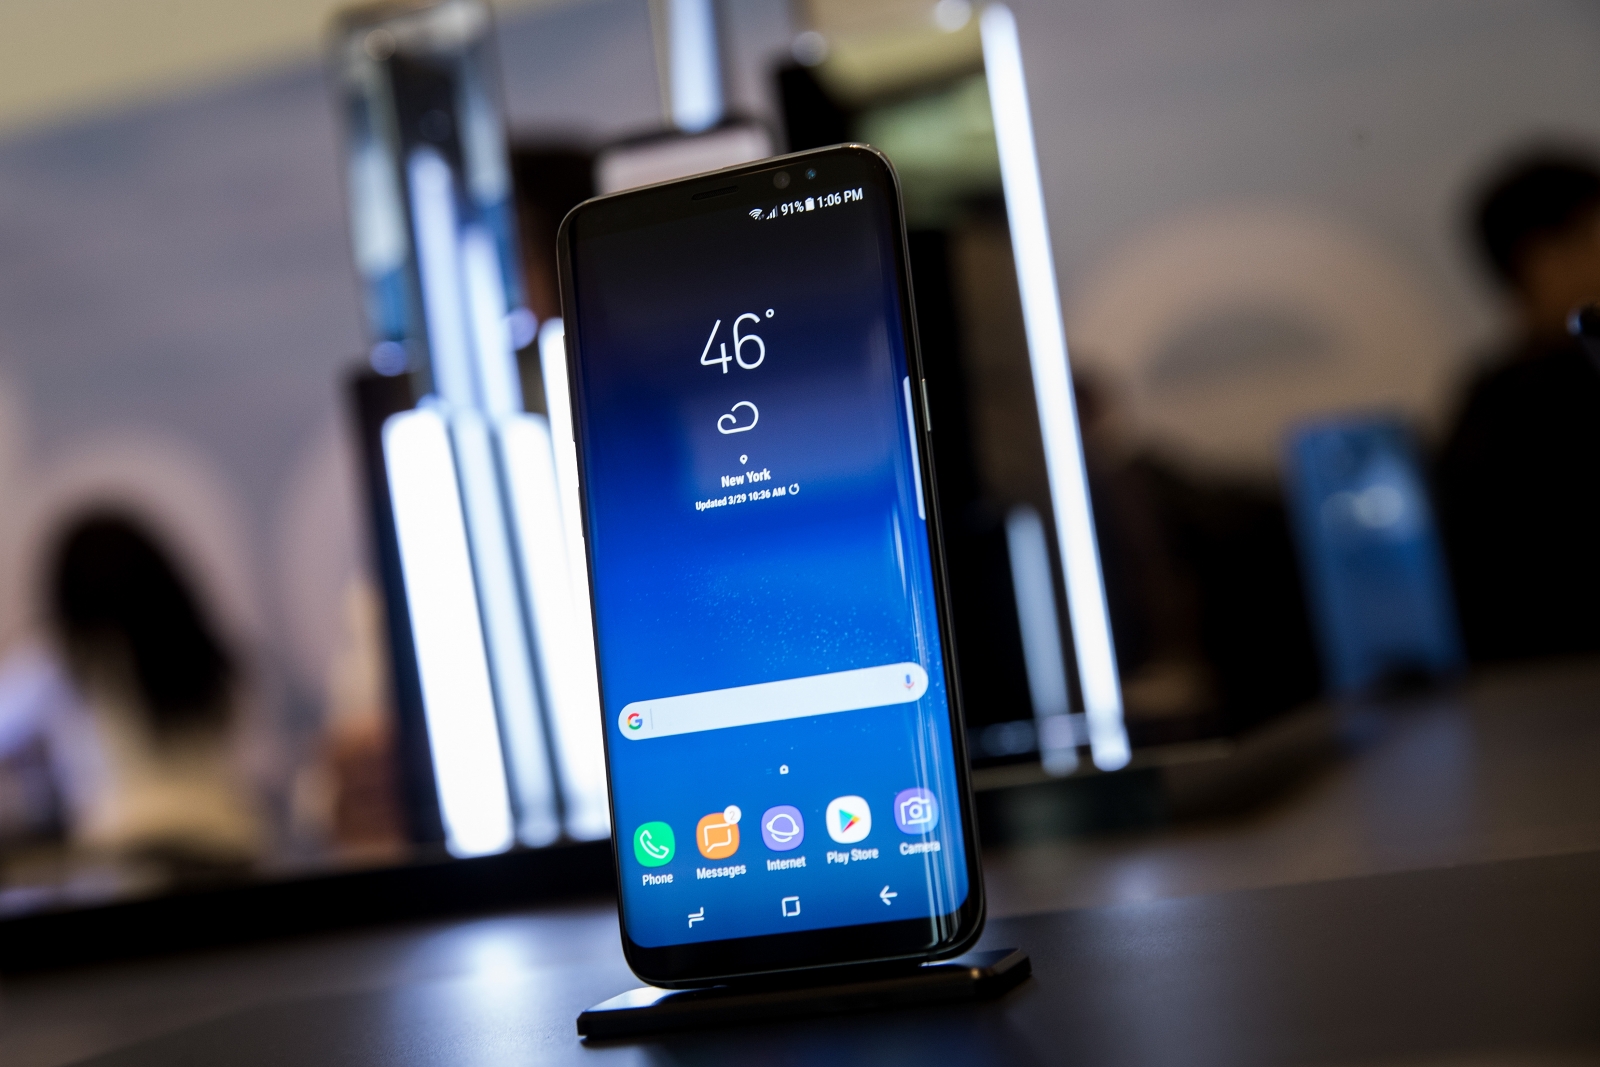 galaxy-s8-dqa-keeps-stopping-error-message